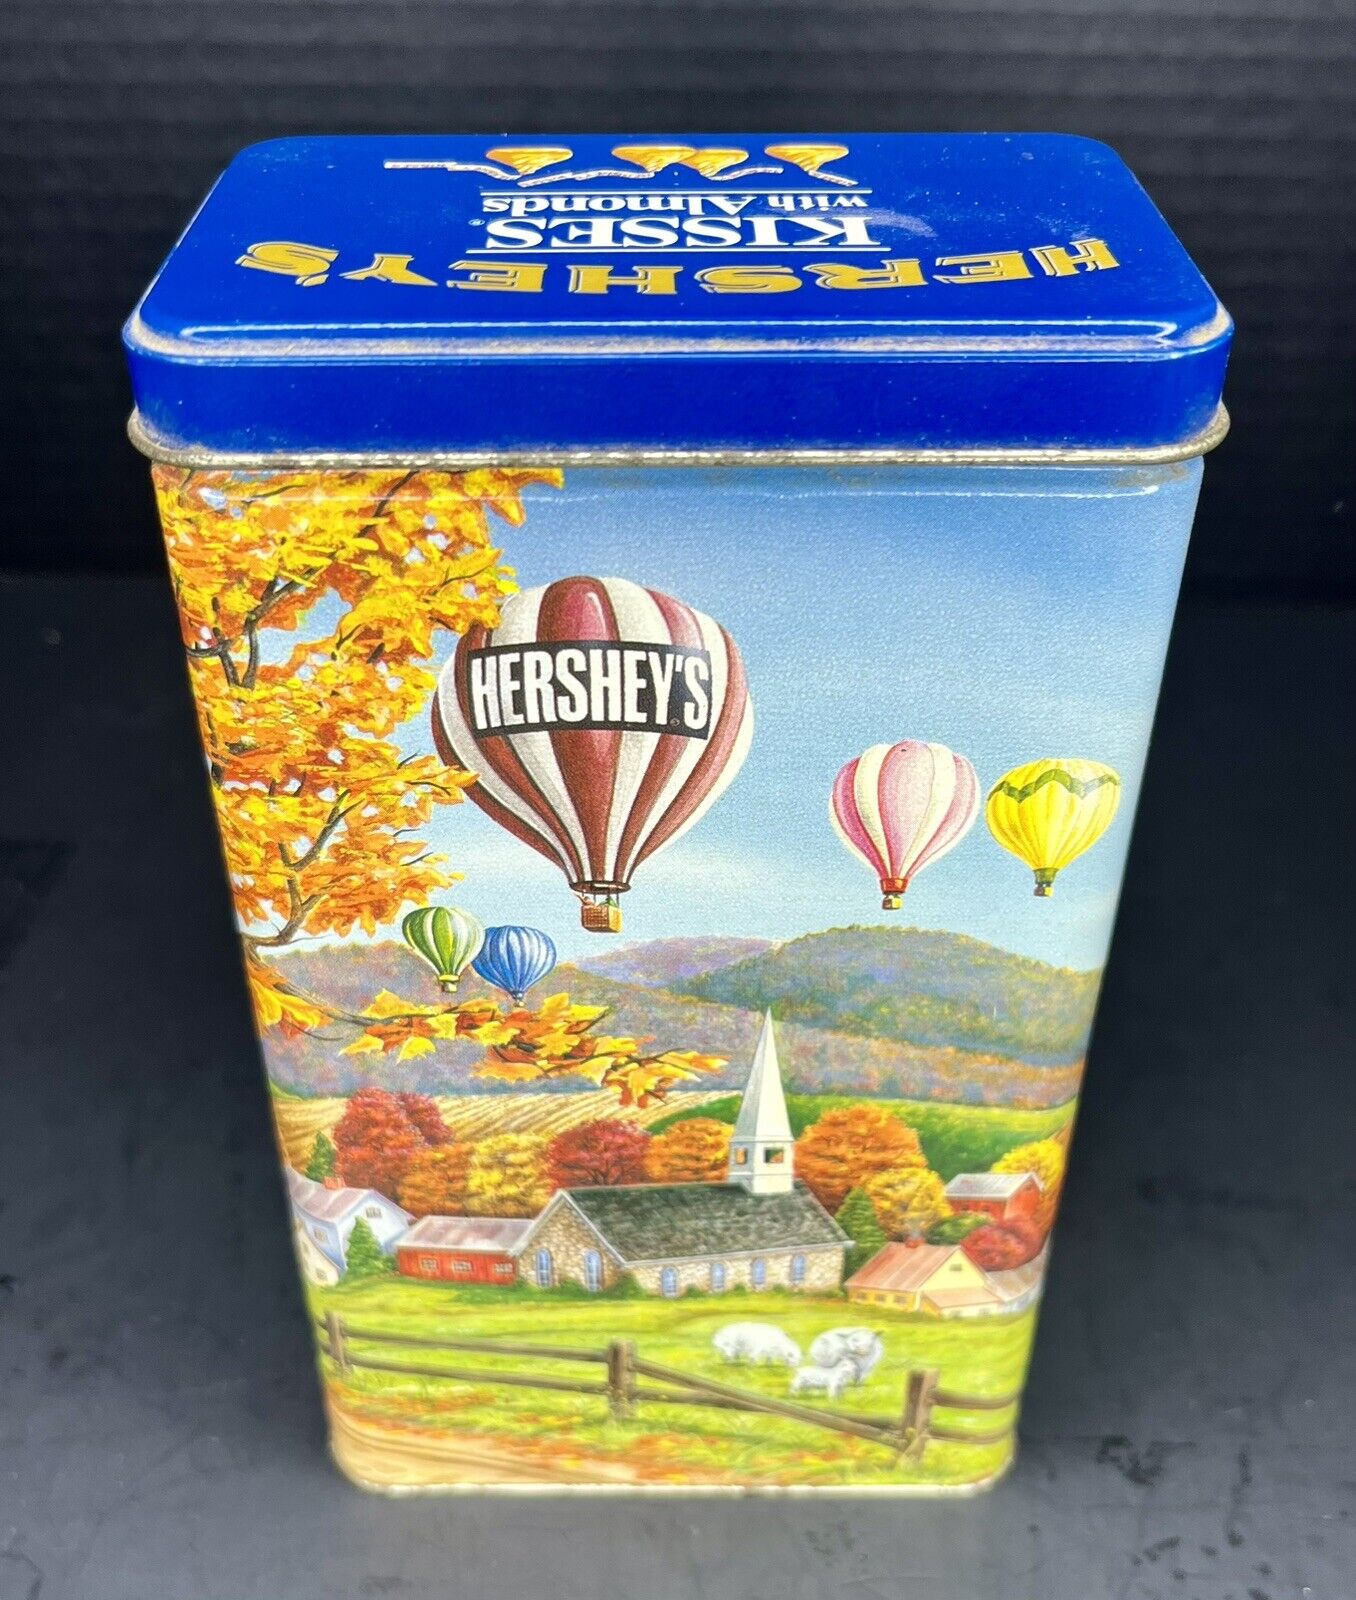 1994 Hershey's Kisses with Almonds Hometown Series Tin Canister  # 11 Autumn USA